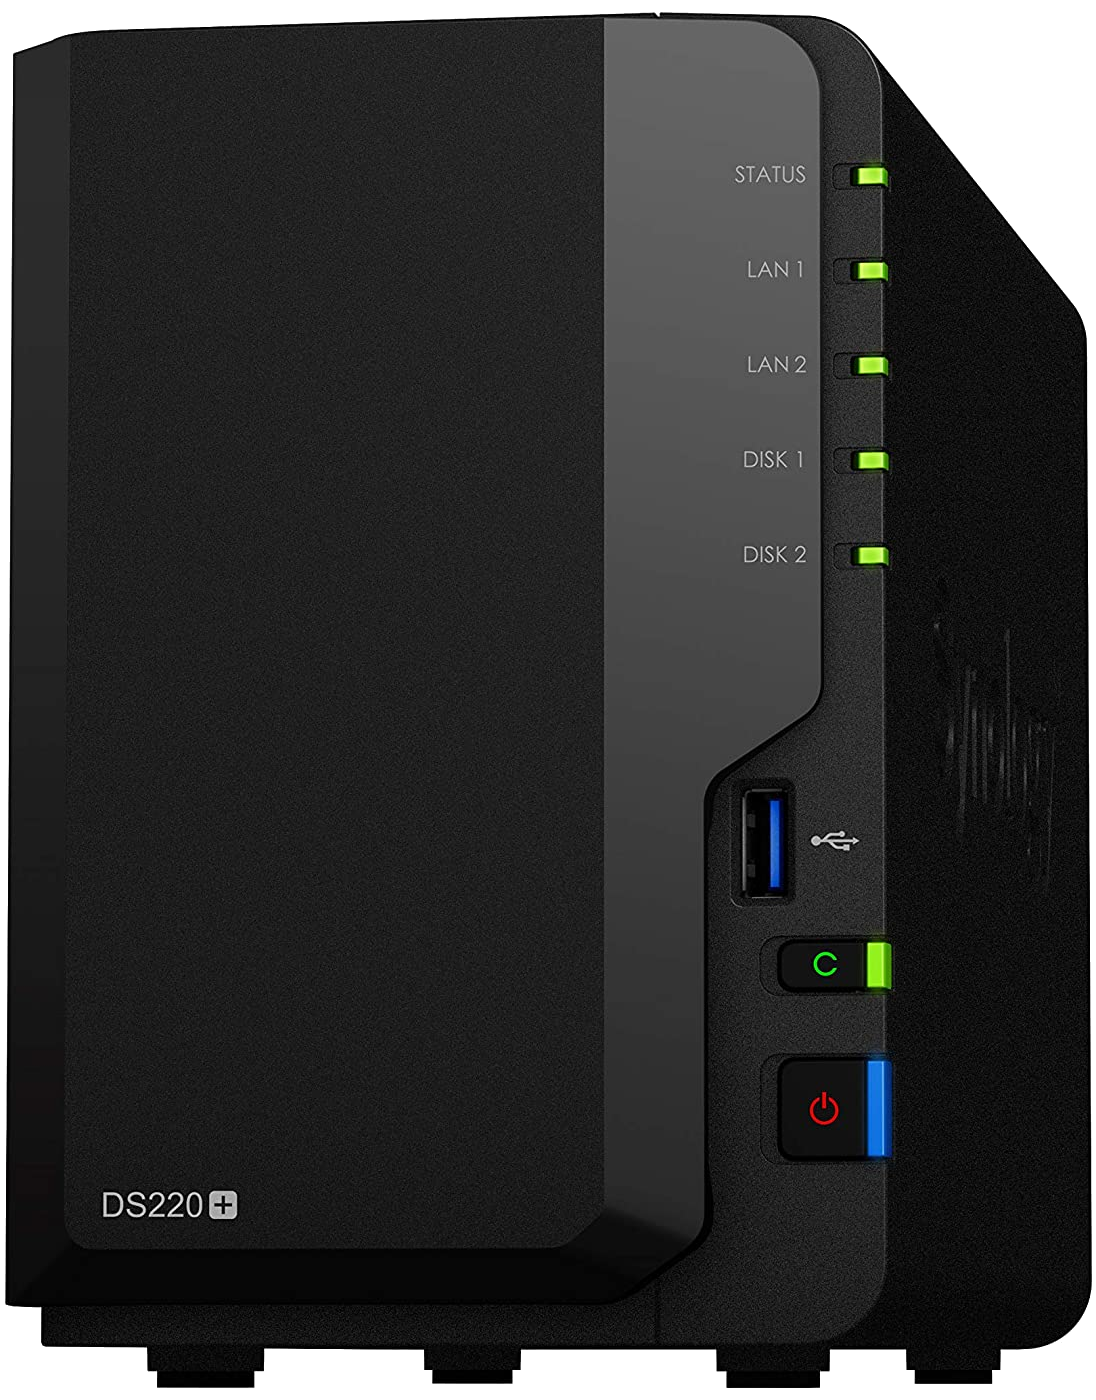 How to Add RAM to Synology DS220+